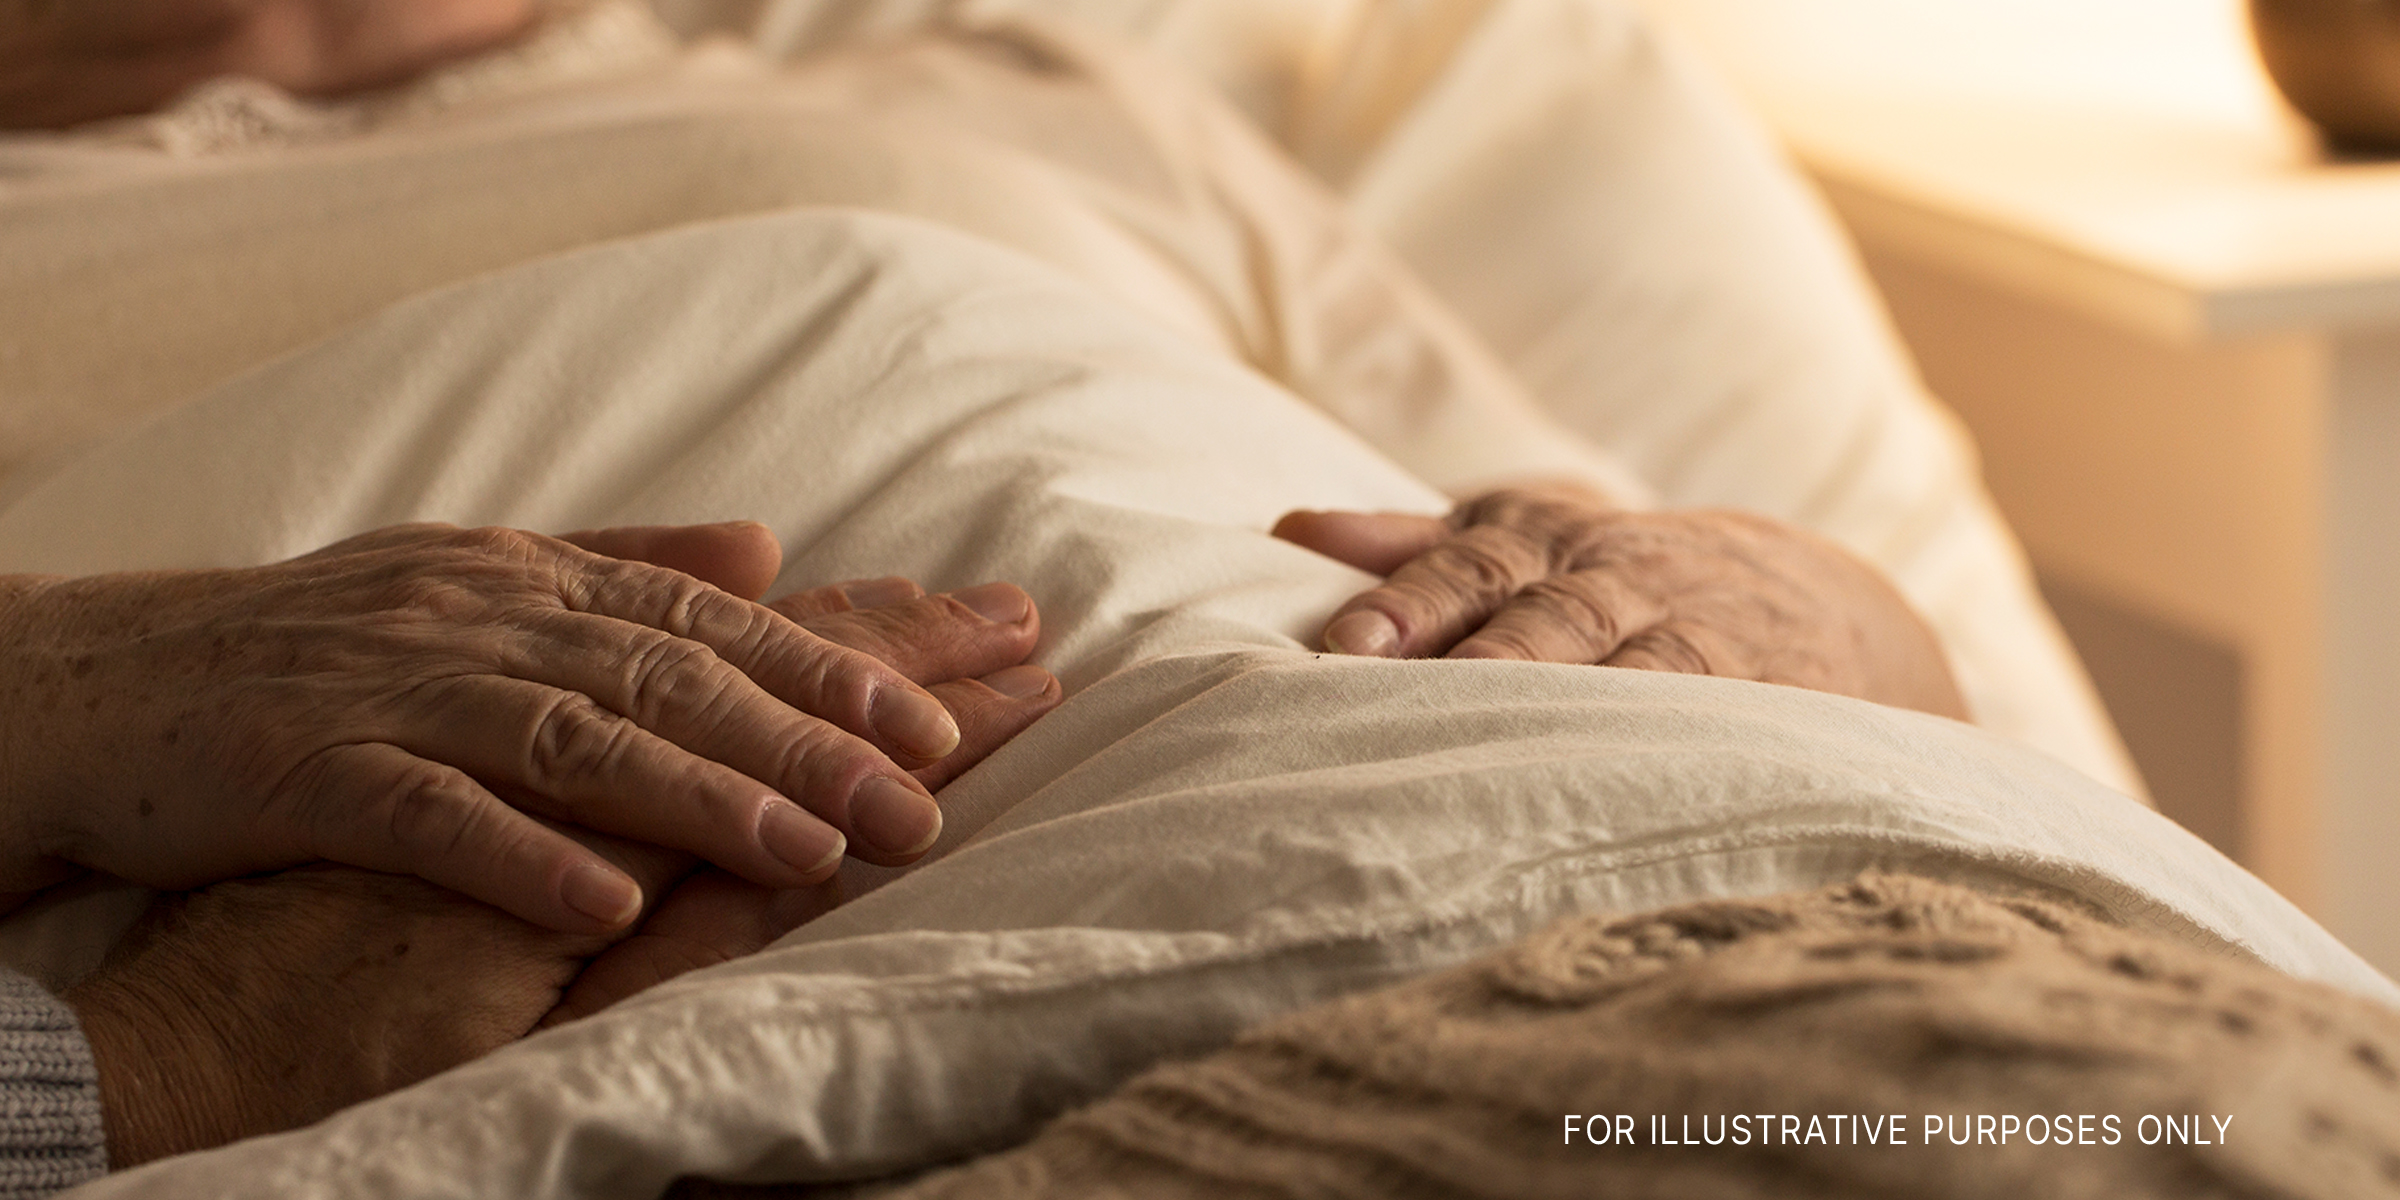 Hands resting on top of the blankets in a hospital bed | Source: Getty Images